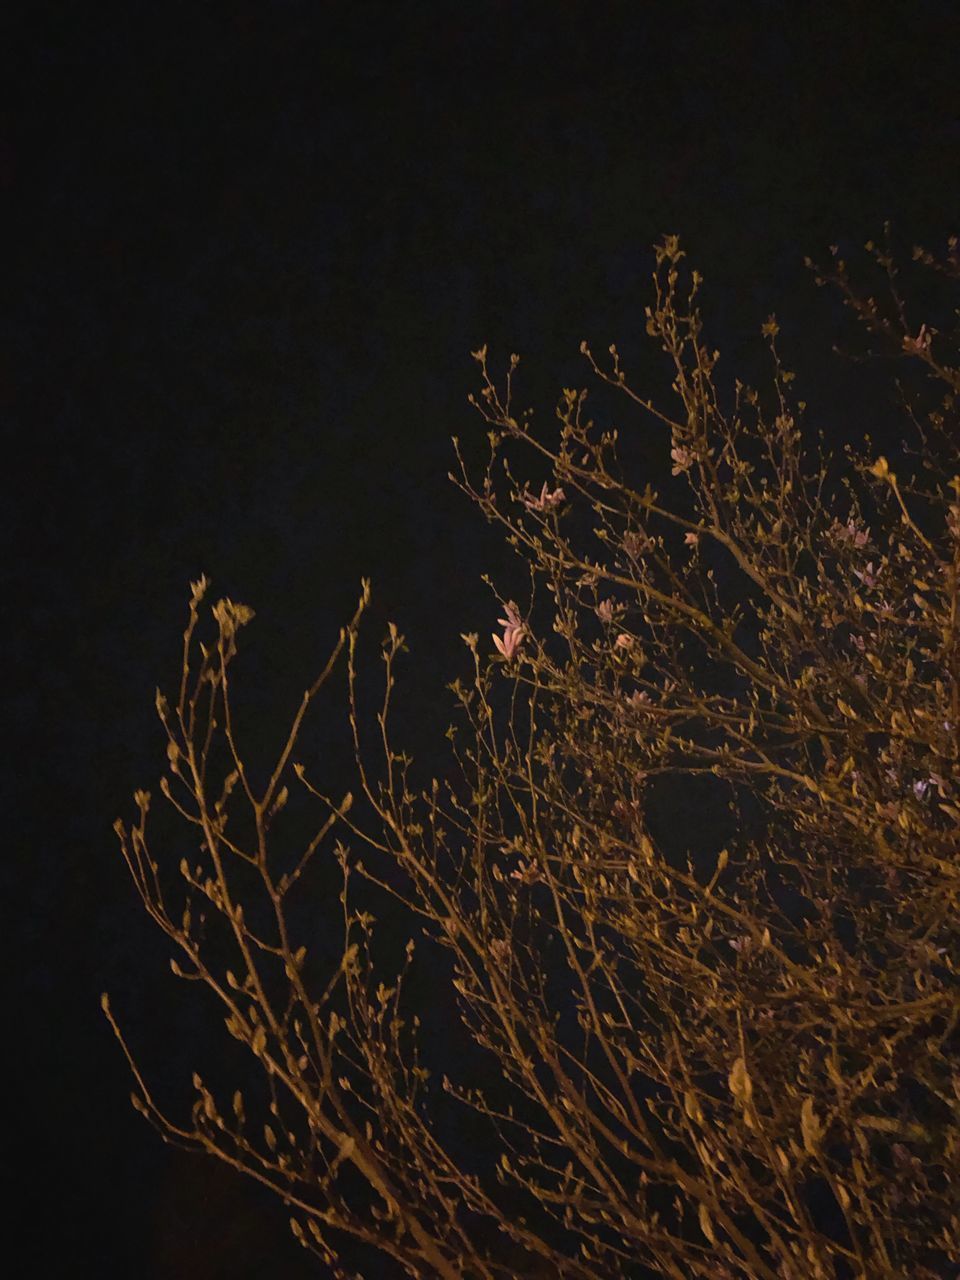 LOW ANGLE VIEW OF BARE TREE AT NIGHT